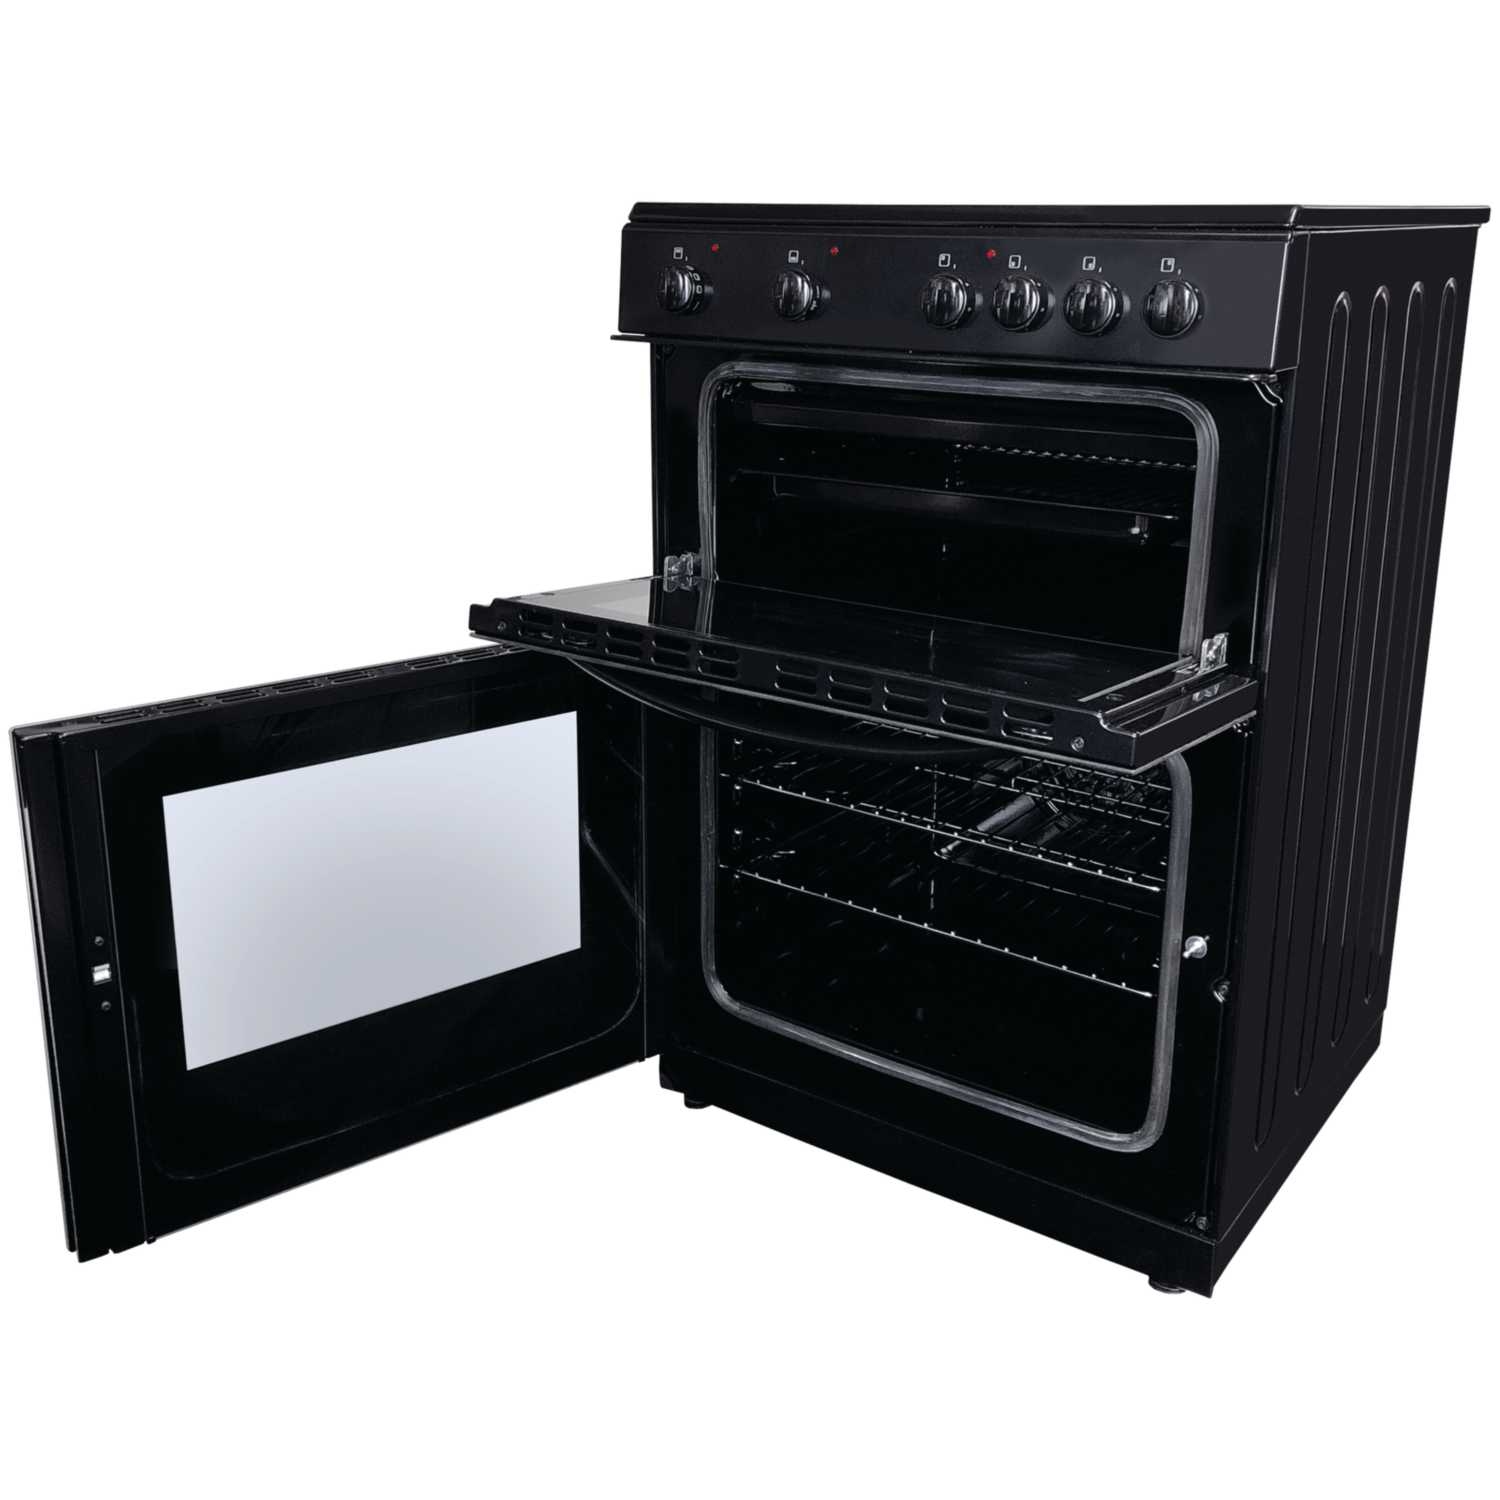 Statesman 60cm Double Oven Electric Cooker - Black - 1